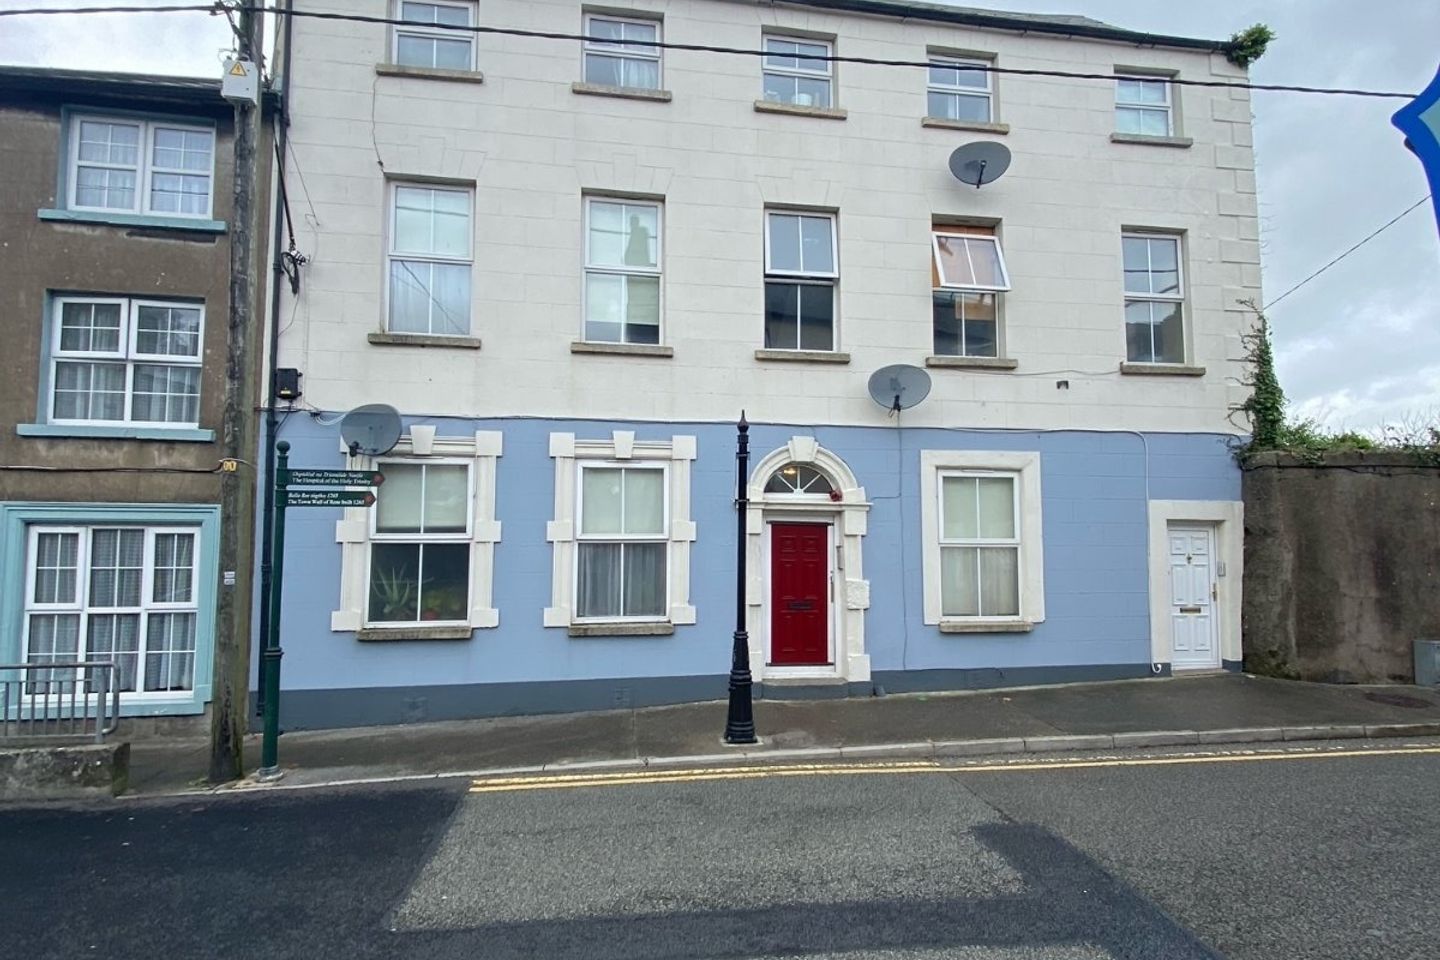 Priory House, Priory Street, New Ross, Co. Wexford